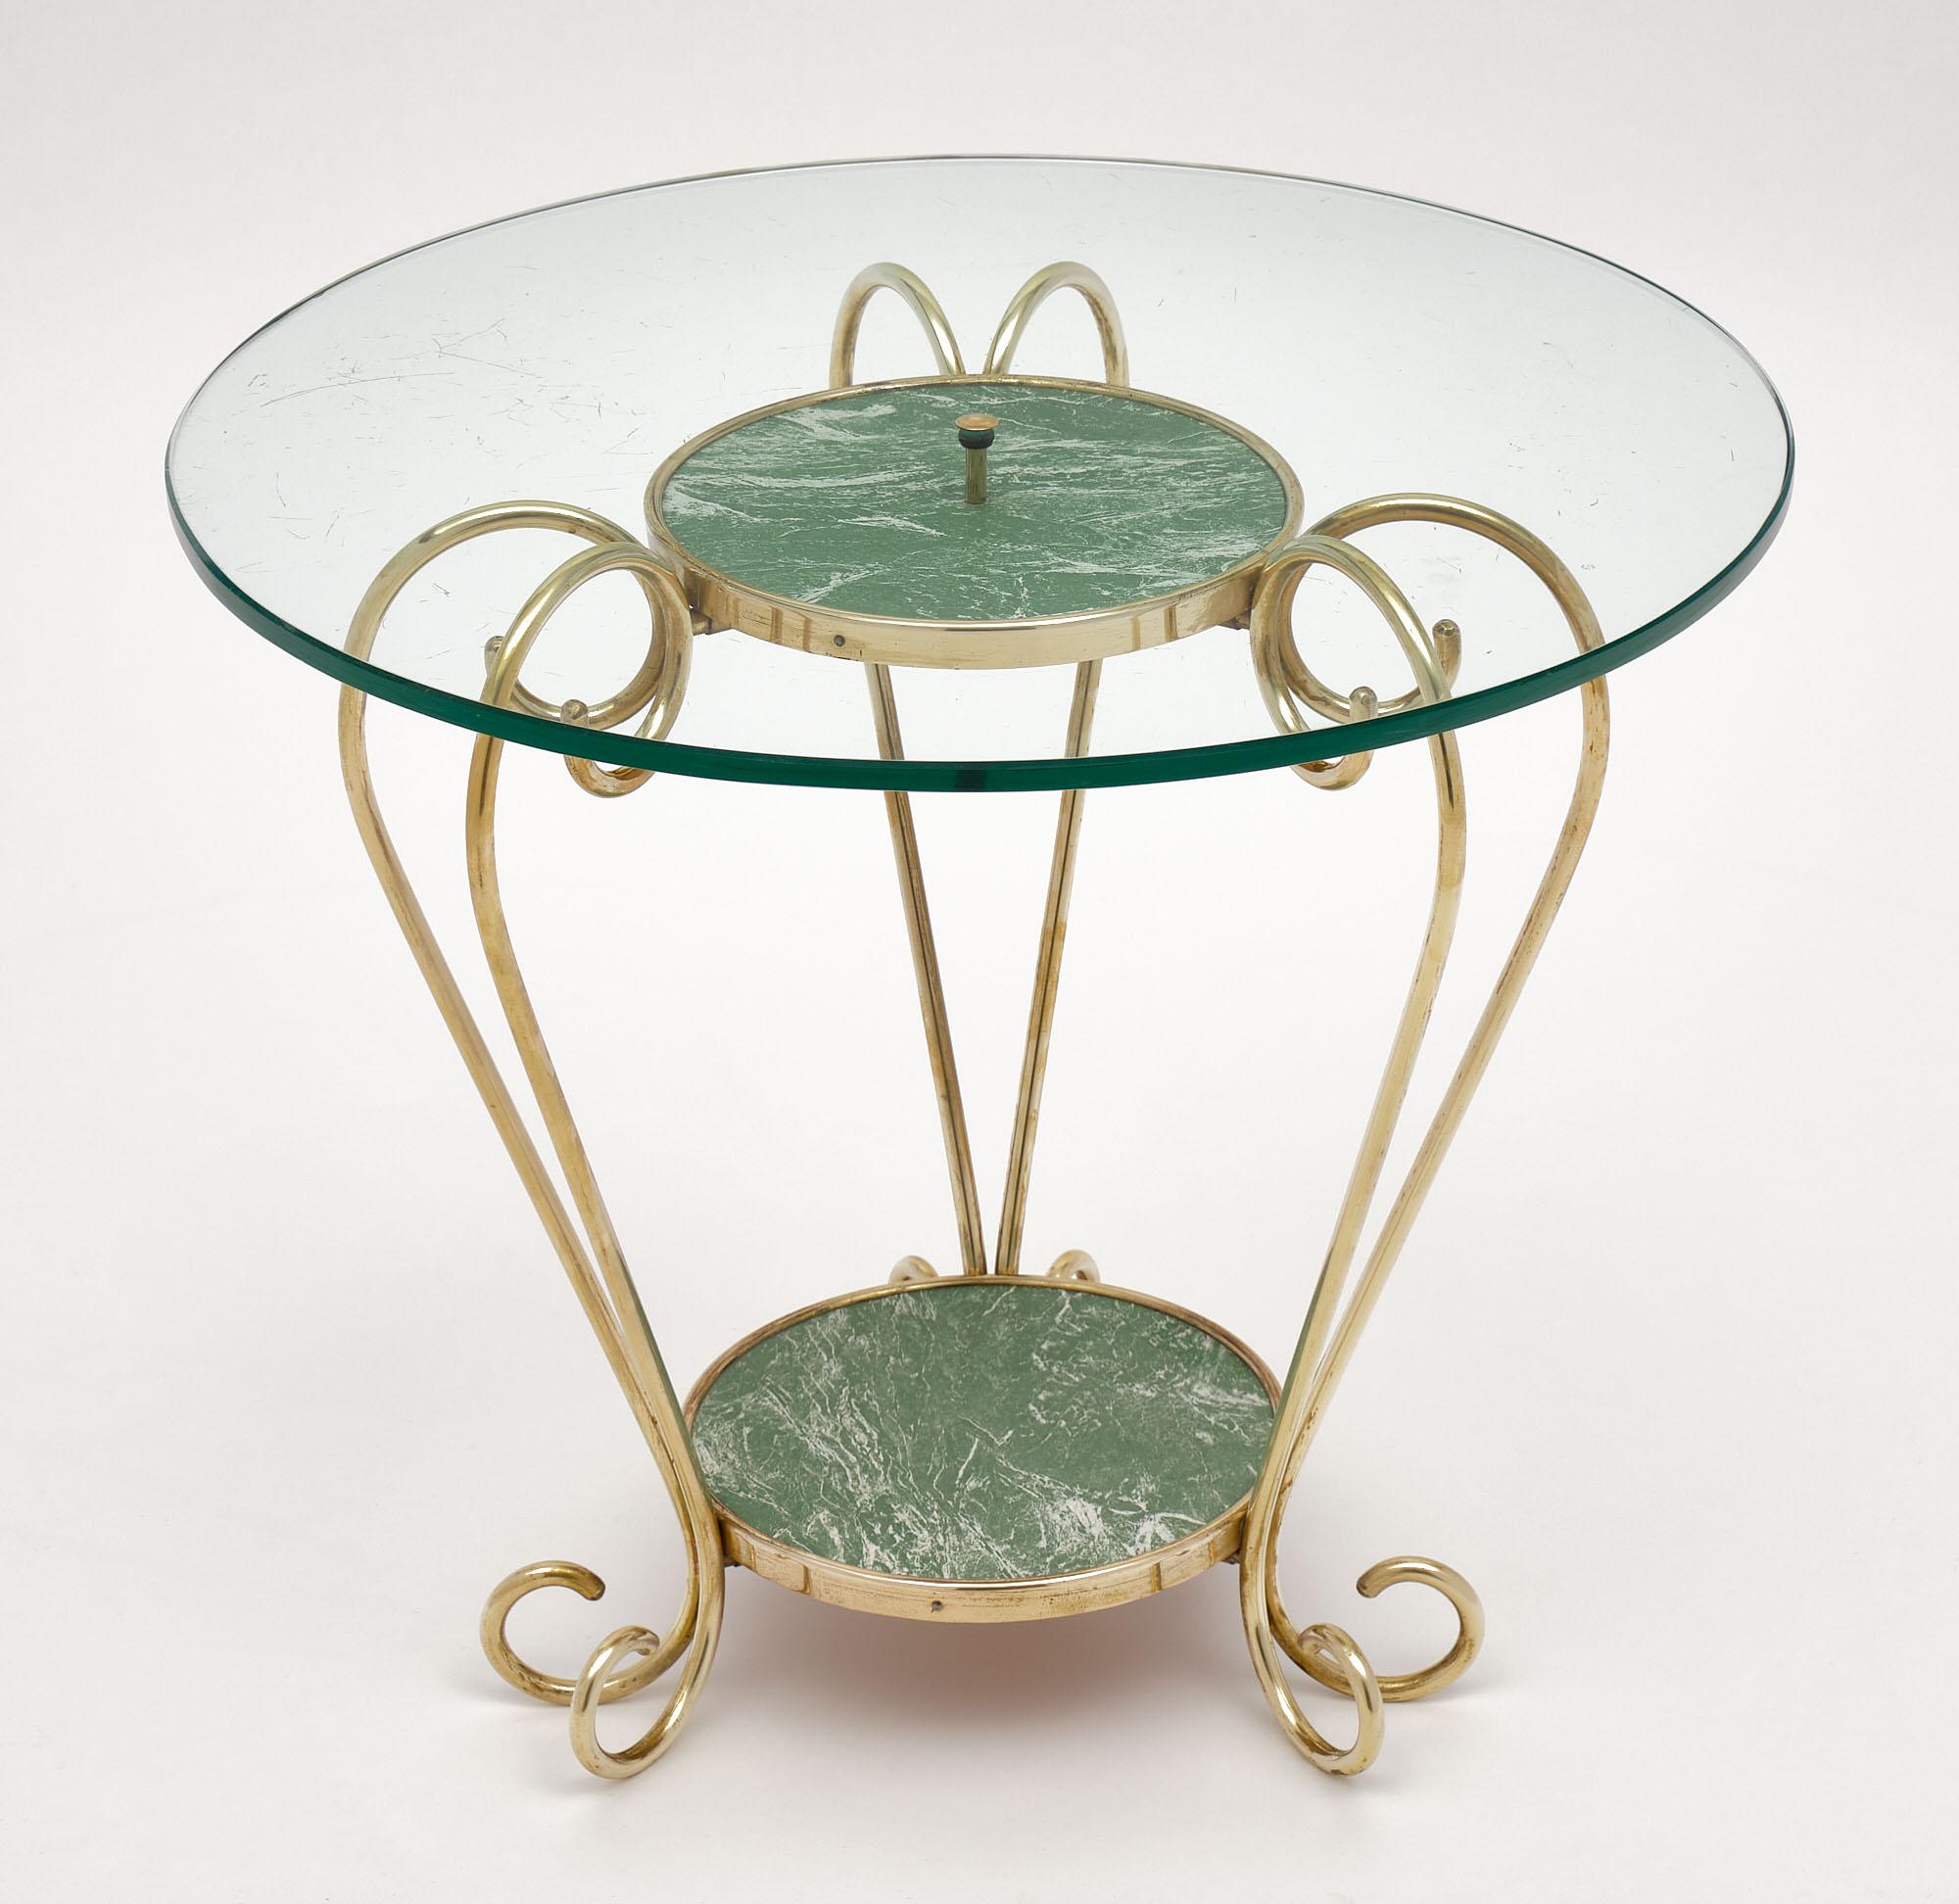 Side table - Italian mid-century side table with Pietra Verde marble tiers and a solid brass structure. The top is the original glass.